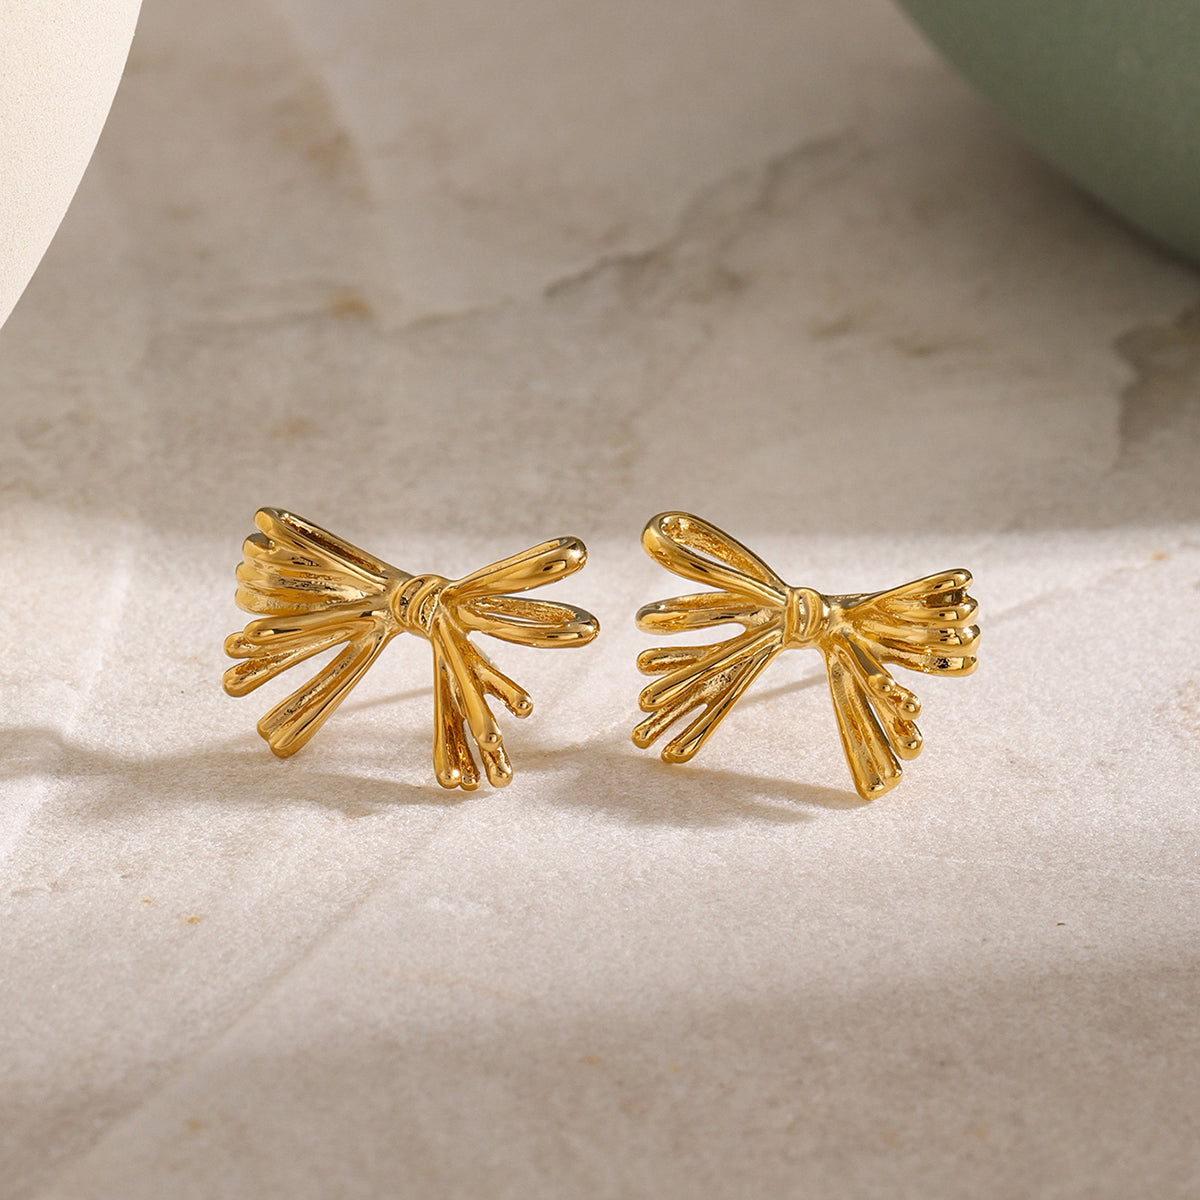 16K Gold-Plated Stainless Steel Bow Earrings